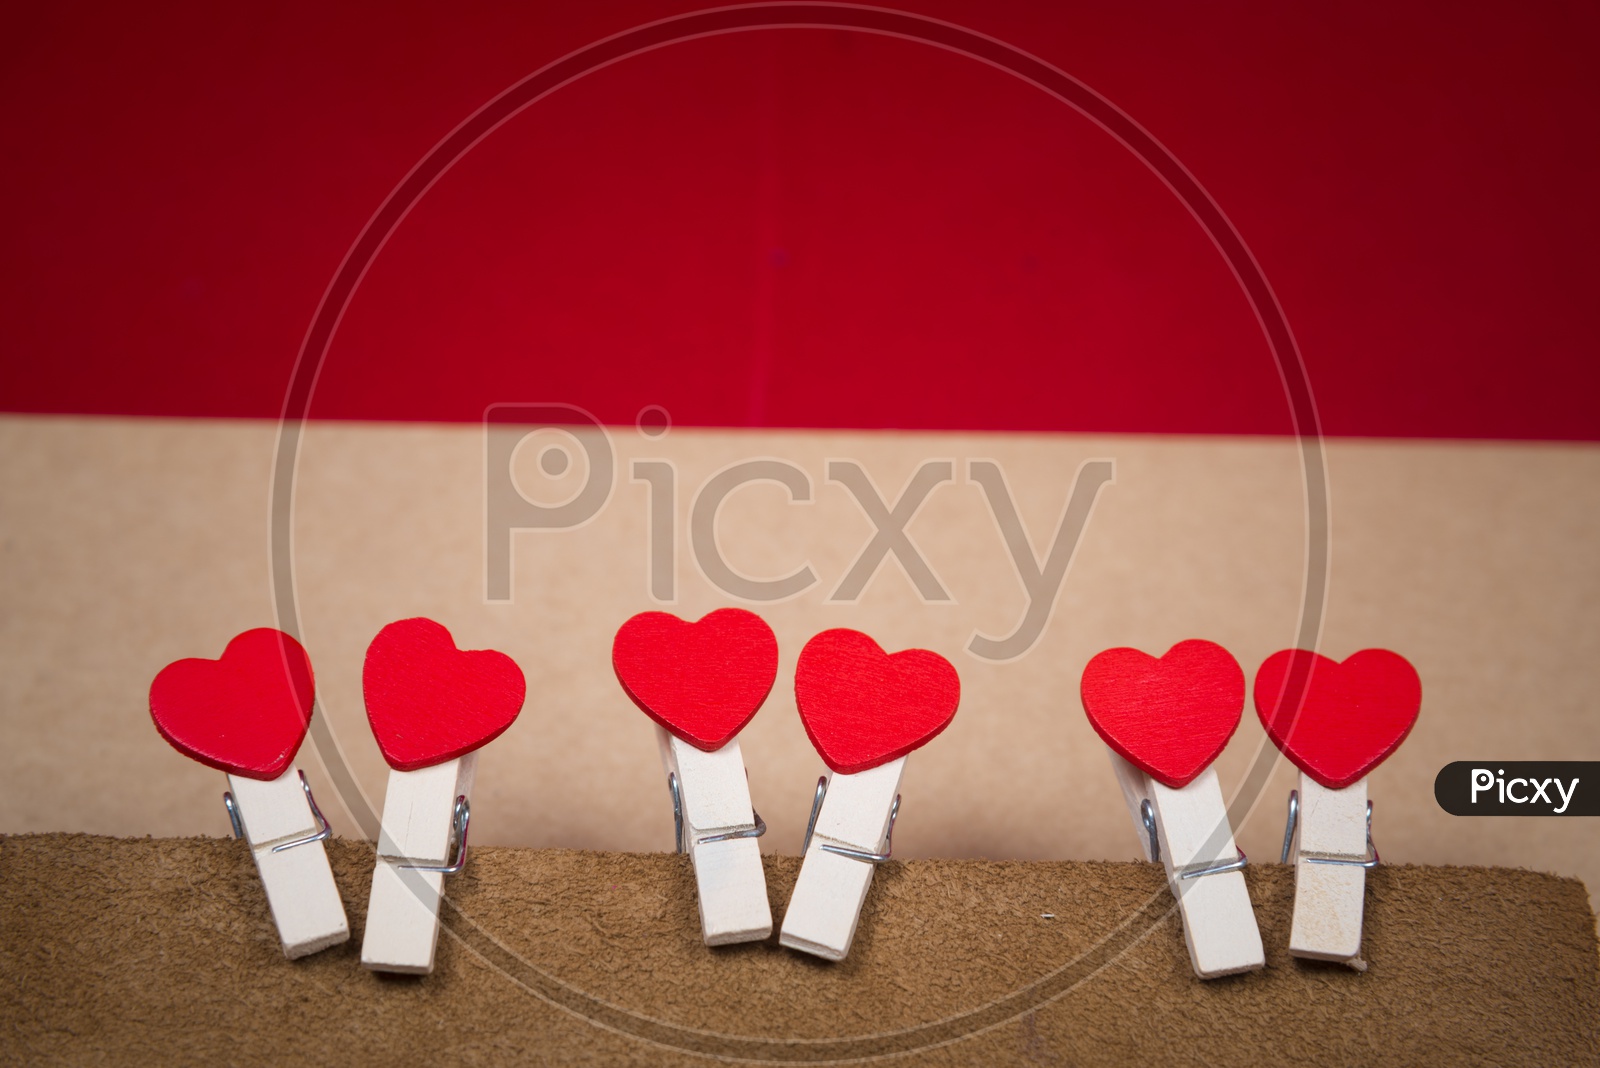 abstract picture for Valentine day With Red Love Hearts  And With Copy Space For Text